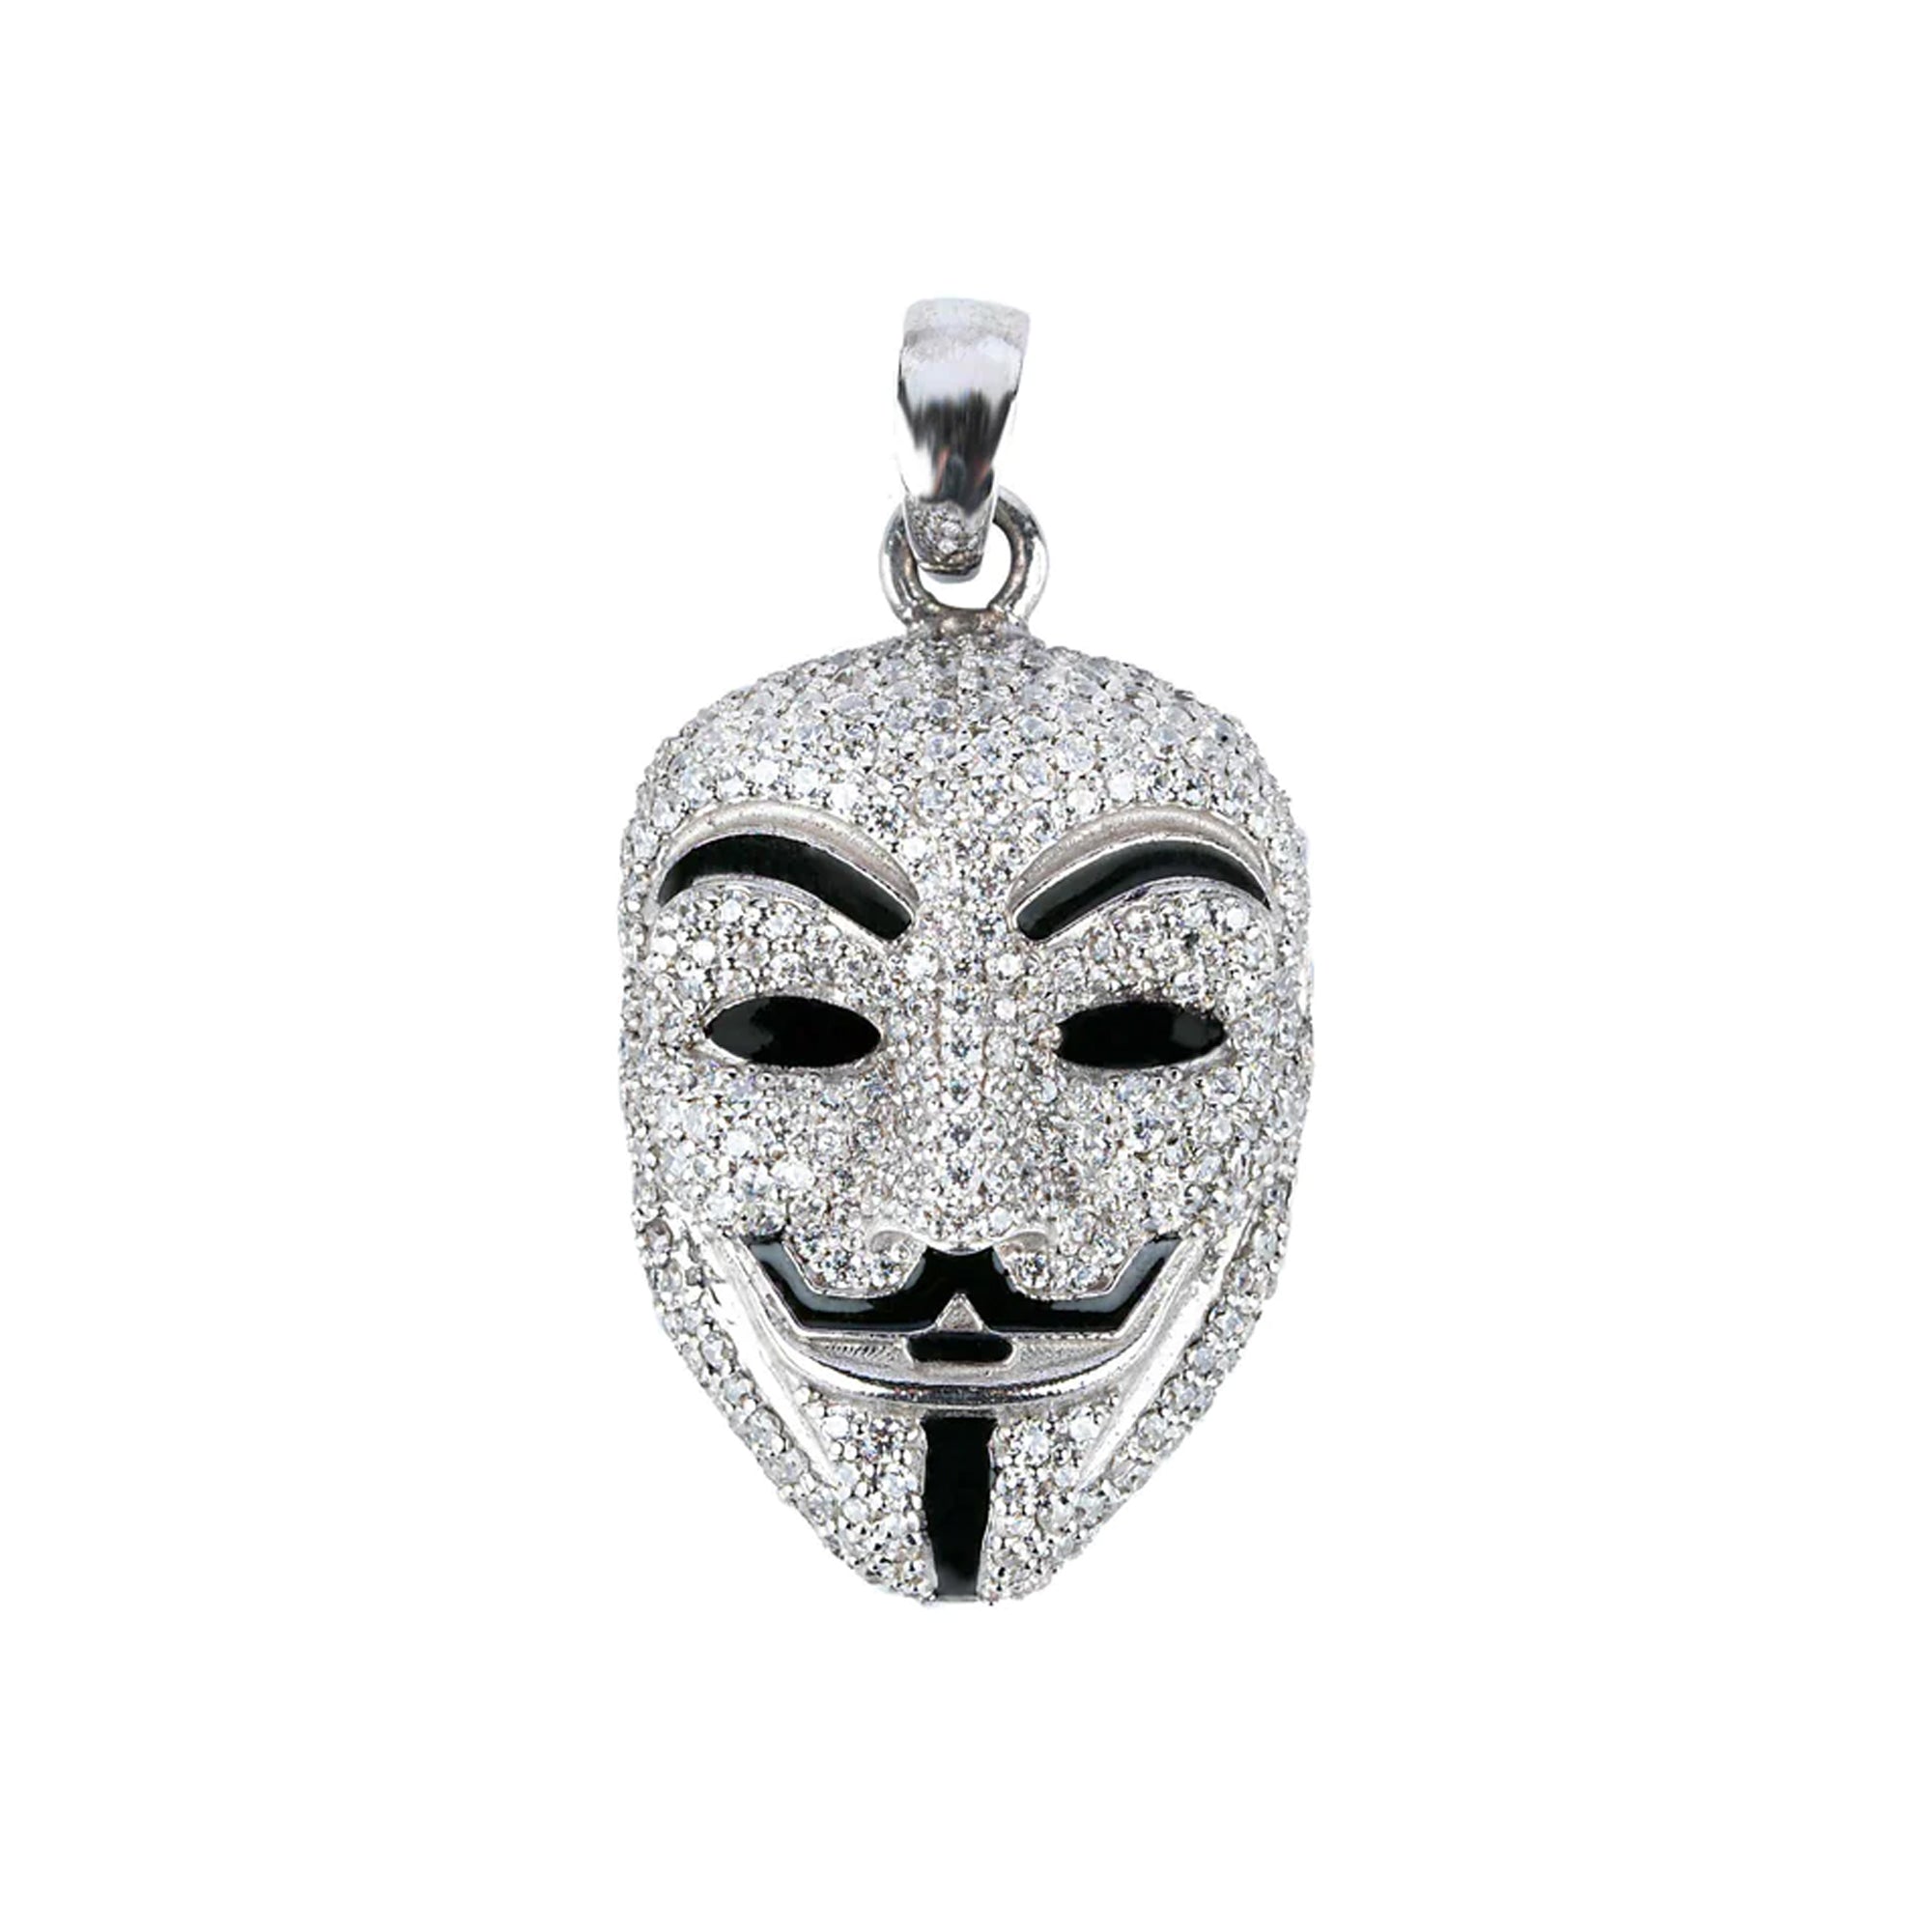 ICED GUY FAWKES WHITE